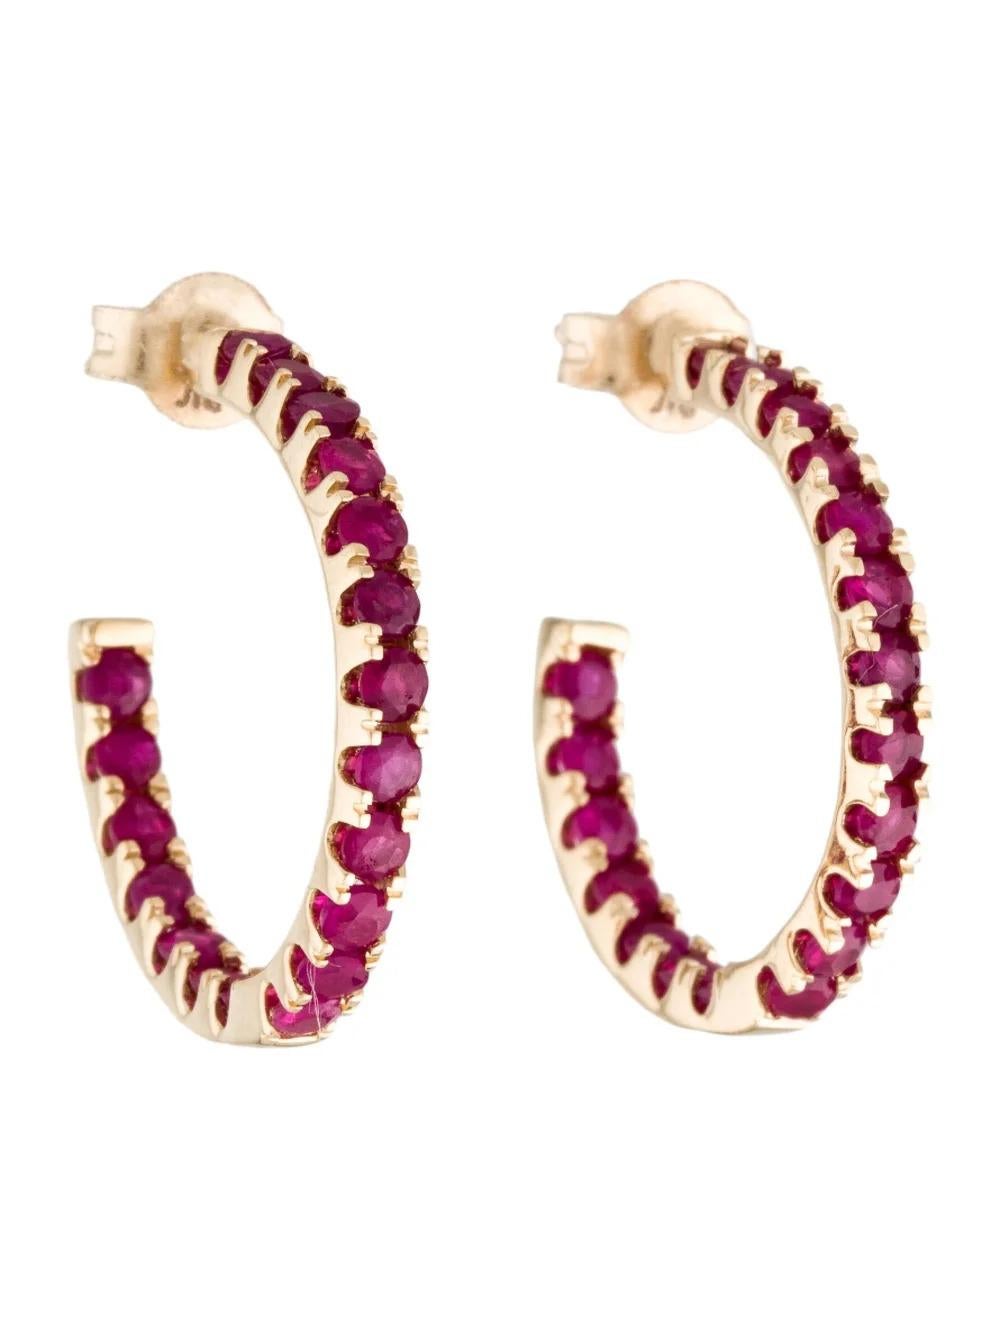 Enhance your elegance with these exquisite 14K Yellow Gold Ruby Inside-Out Hoop Earrings, a perfect blend of sophistication and charm.

Specifications:

* Metal Type: 14K Yellow Gold
* Gemstone: Ruby
* Carat Weight: 1.86
* Stone Count: 38
* Stone